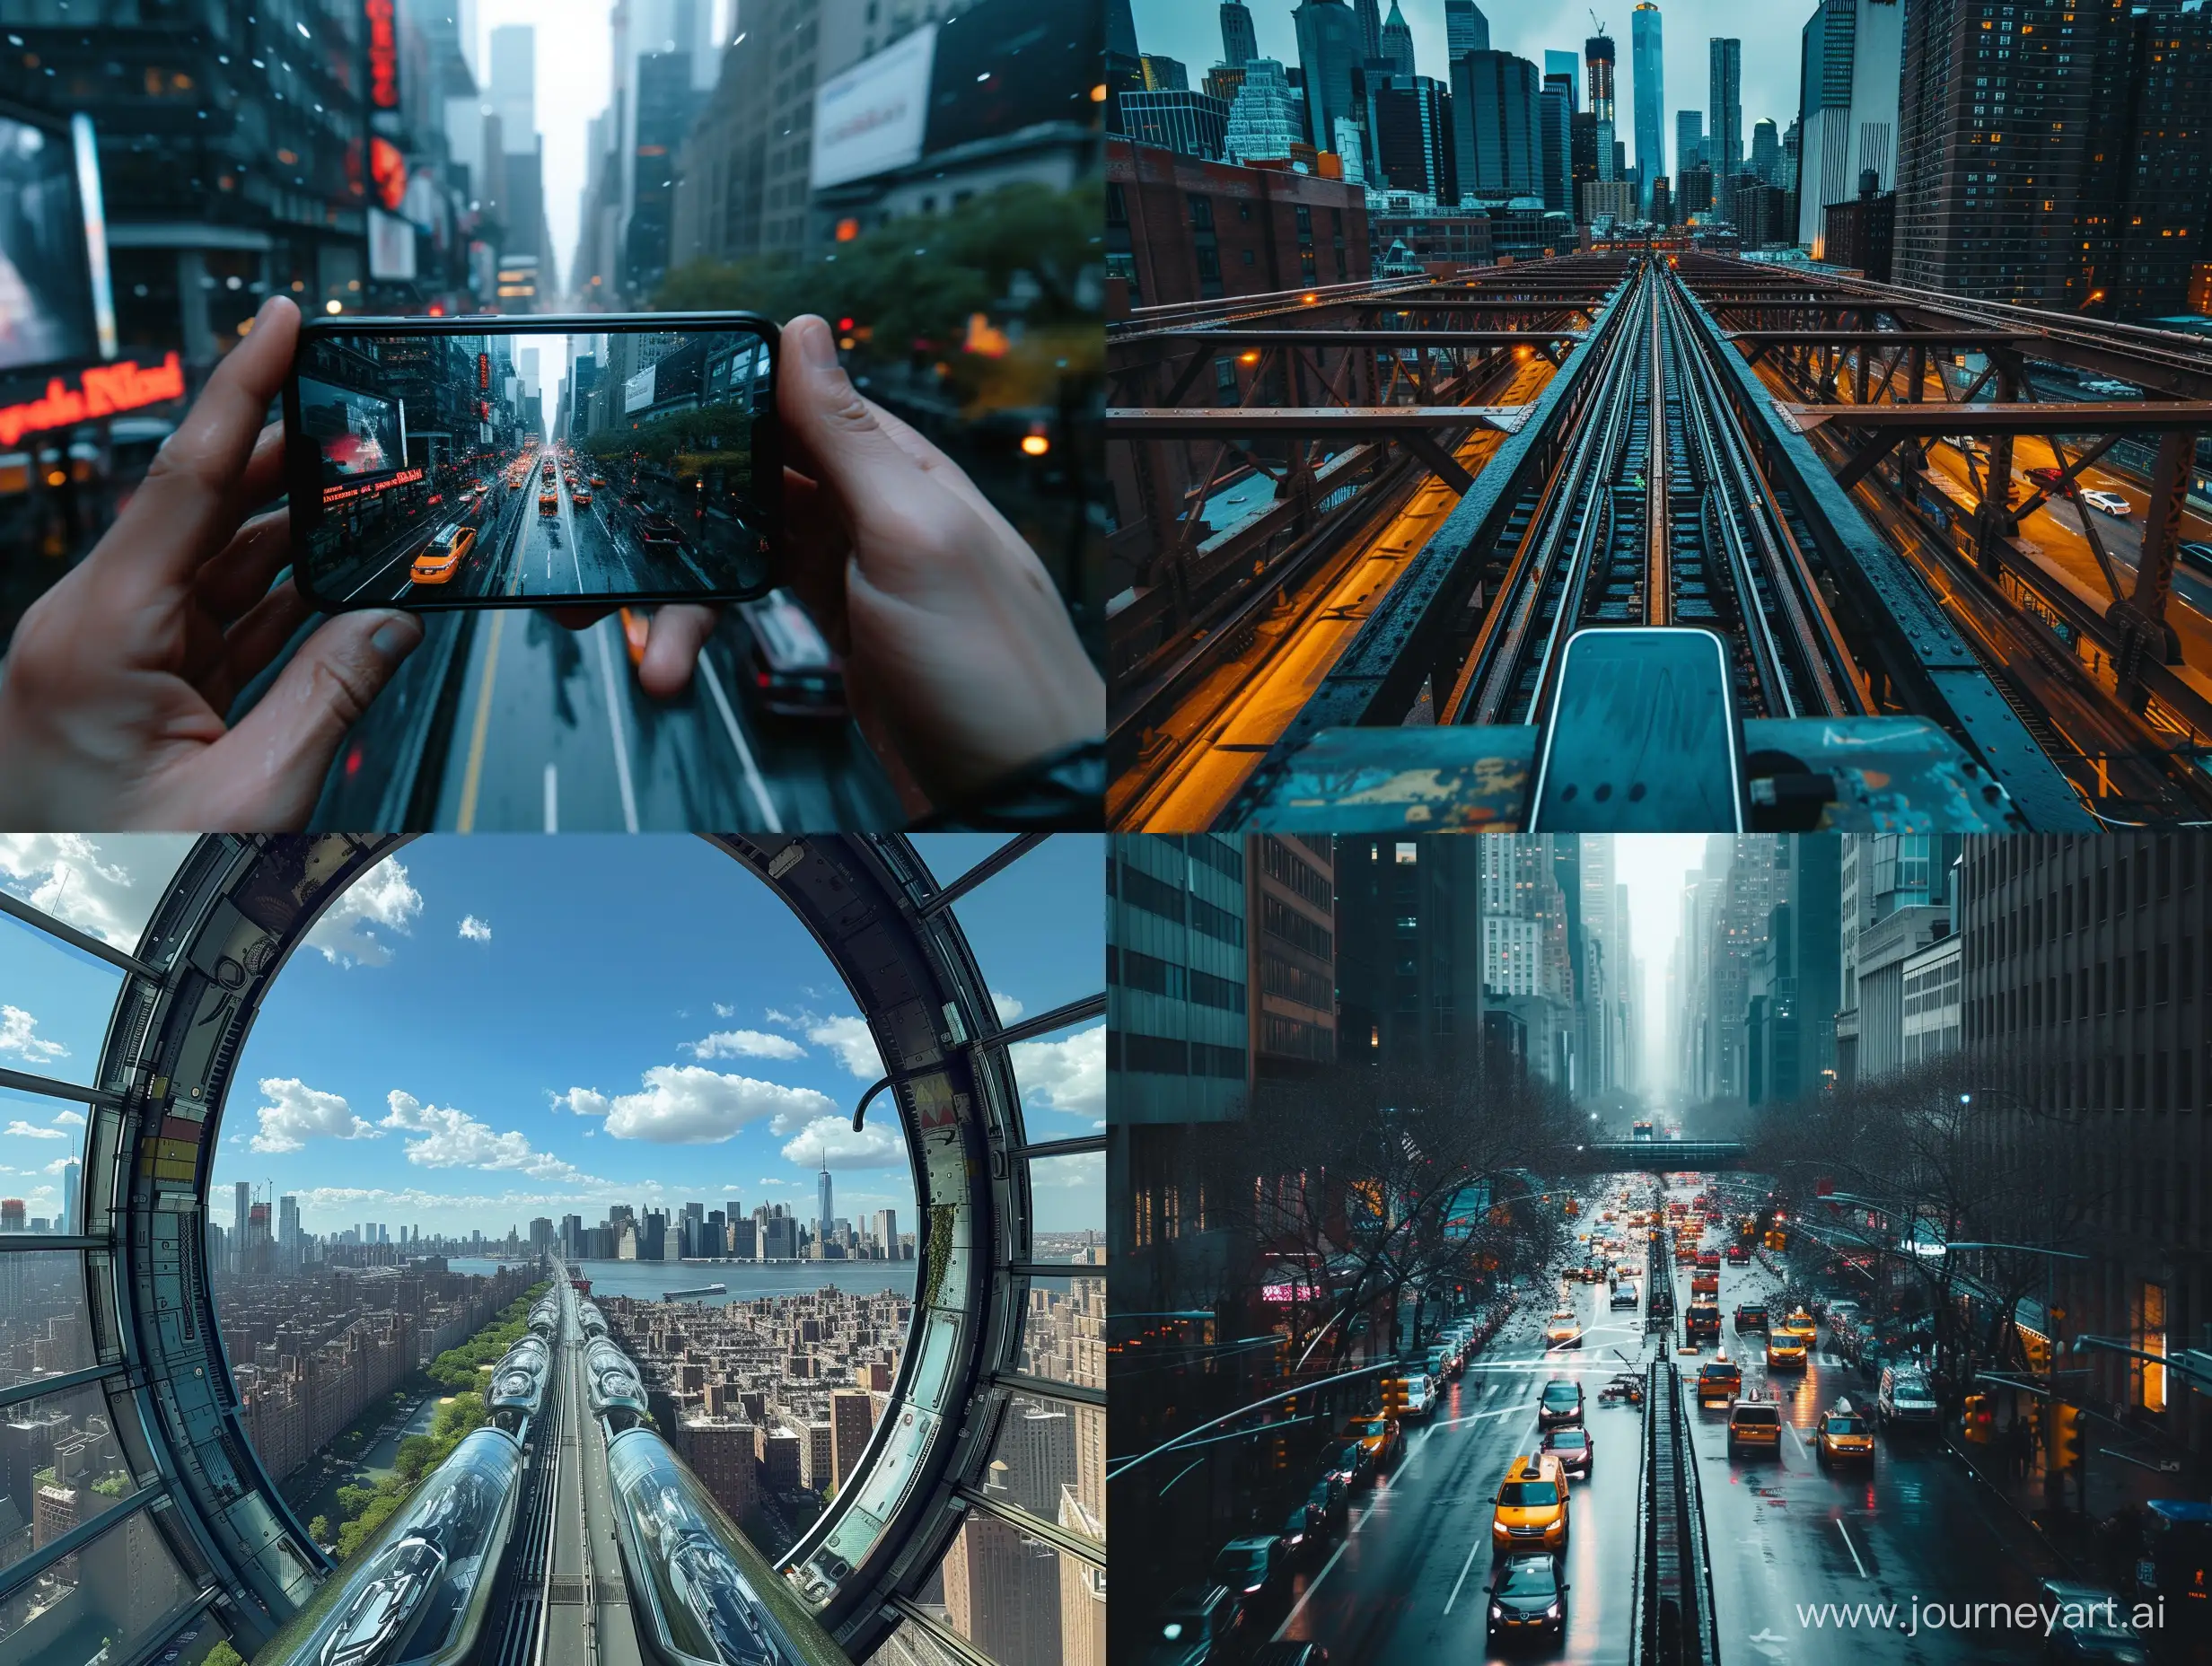 Futuristic-New-York-Cityscape-Captivating-Photography-of-a-Stylish-Urban-Environment-with-Wide-Transportation-Views